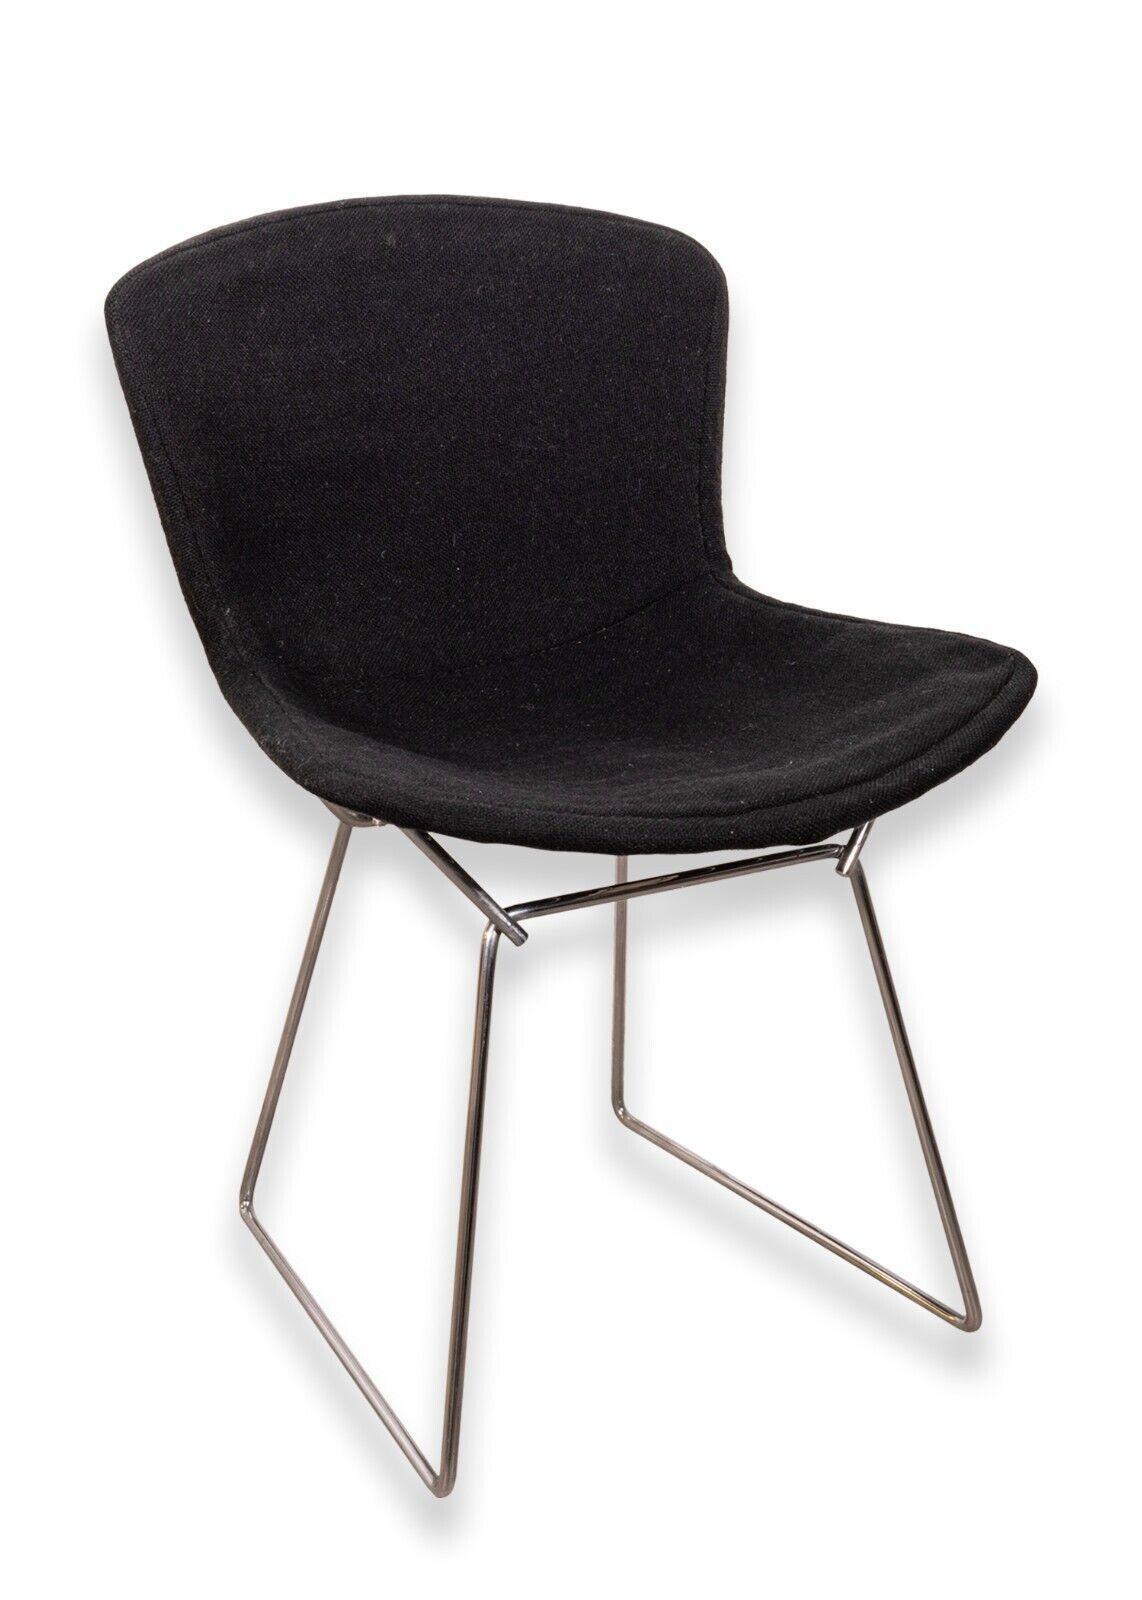 Set of 4 Vintage Knoll Bertoia wire side chairs with black seat covers. An amazing set Harry Bertoia chairs featuring his iconic wire construction and design. These chairs have original Knoll tagging on the underside. They additionally feature very